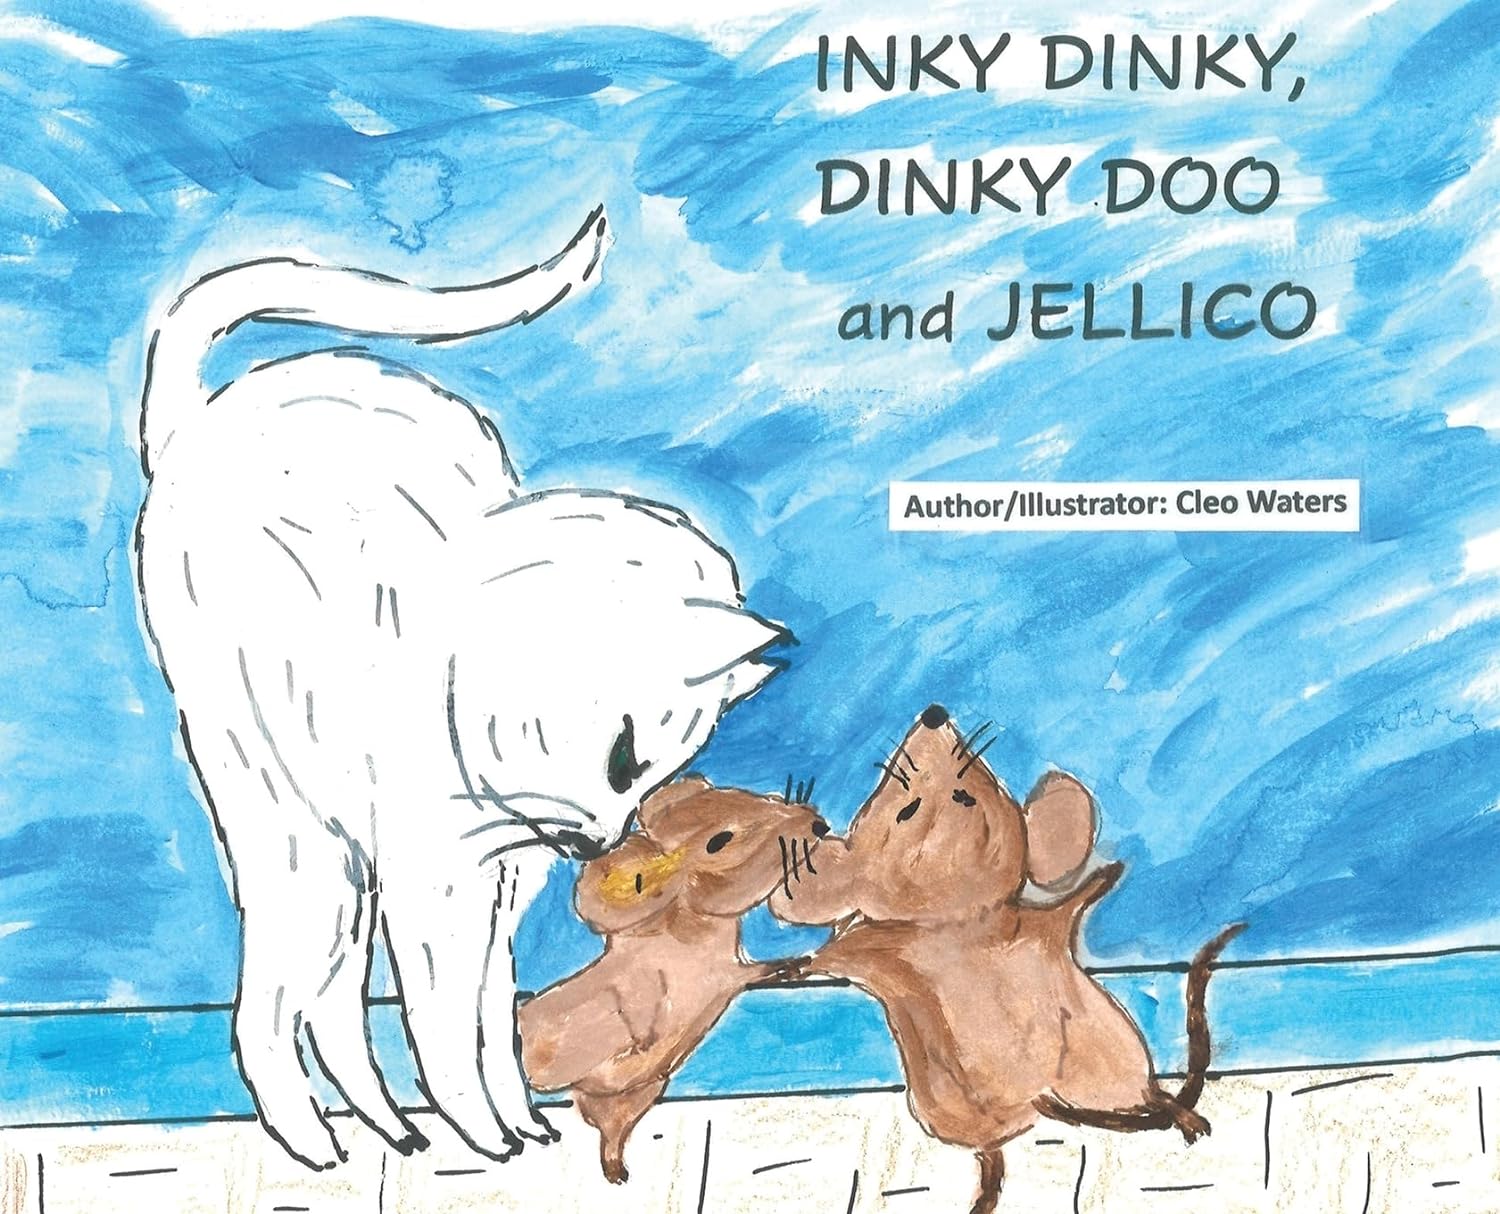 Captivating New Children's Book, 'Inky Dinky, Dinky Doo and Jellico' Unveils a Timeless Tale of Friendship and Imagination